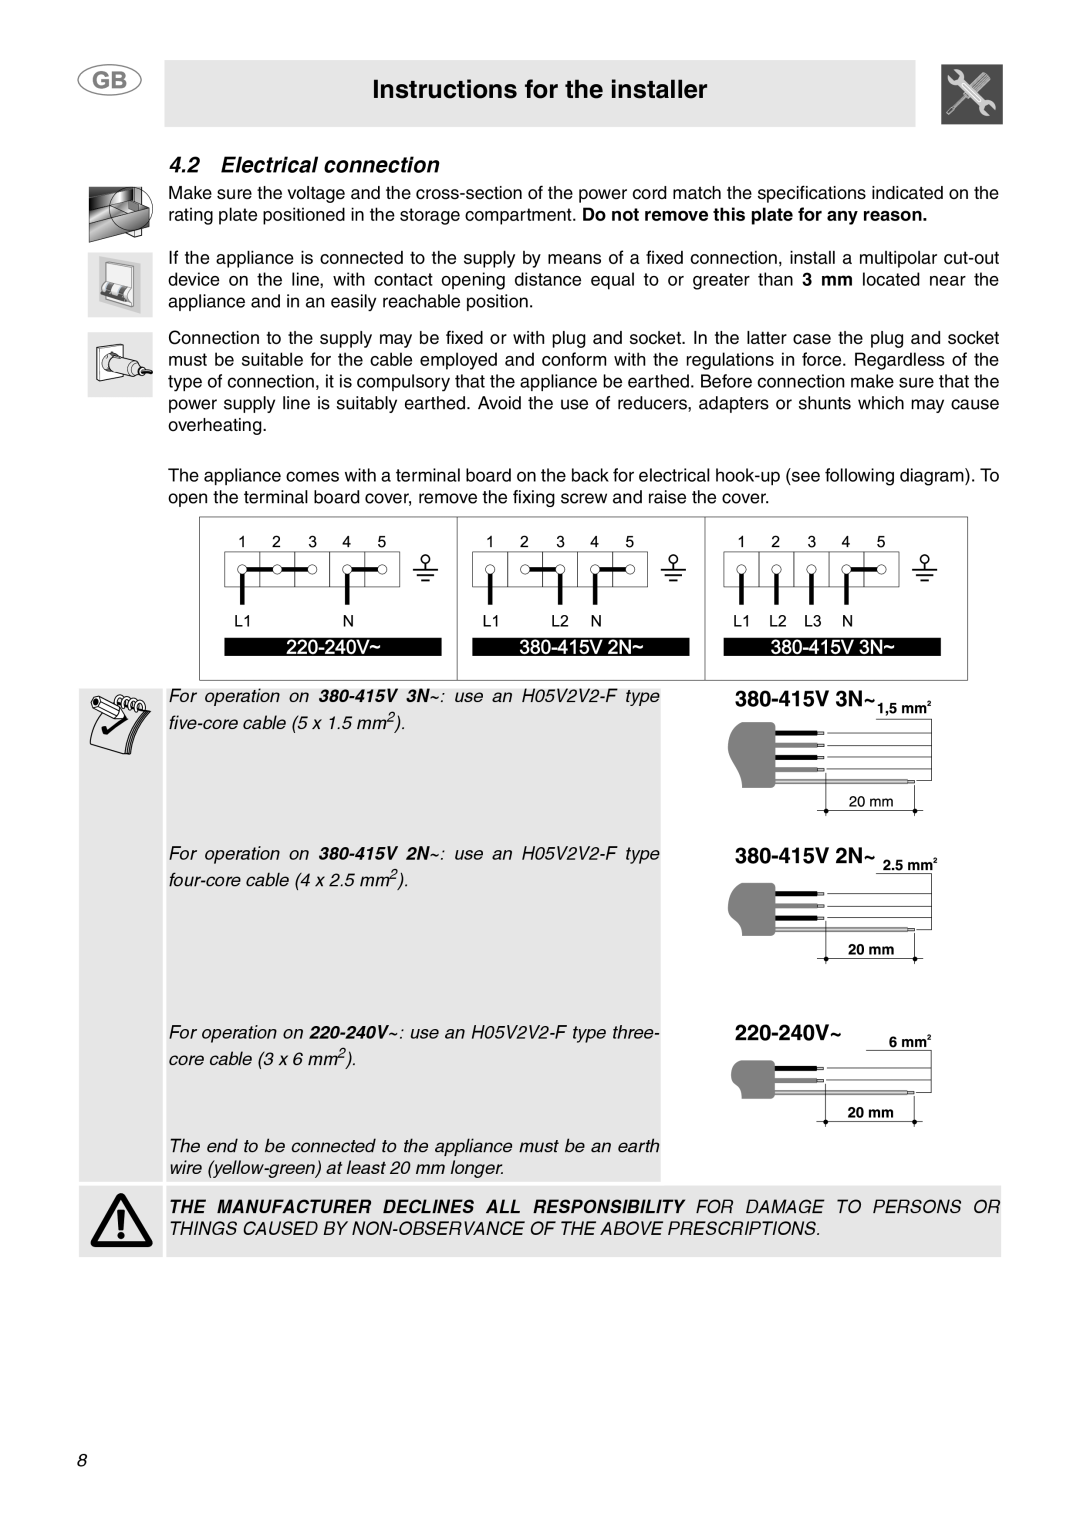 Smeg SY4110 manual Electrical connection, Instructions for the installer, five-corecable 5 x 1.5 mm2 